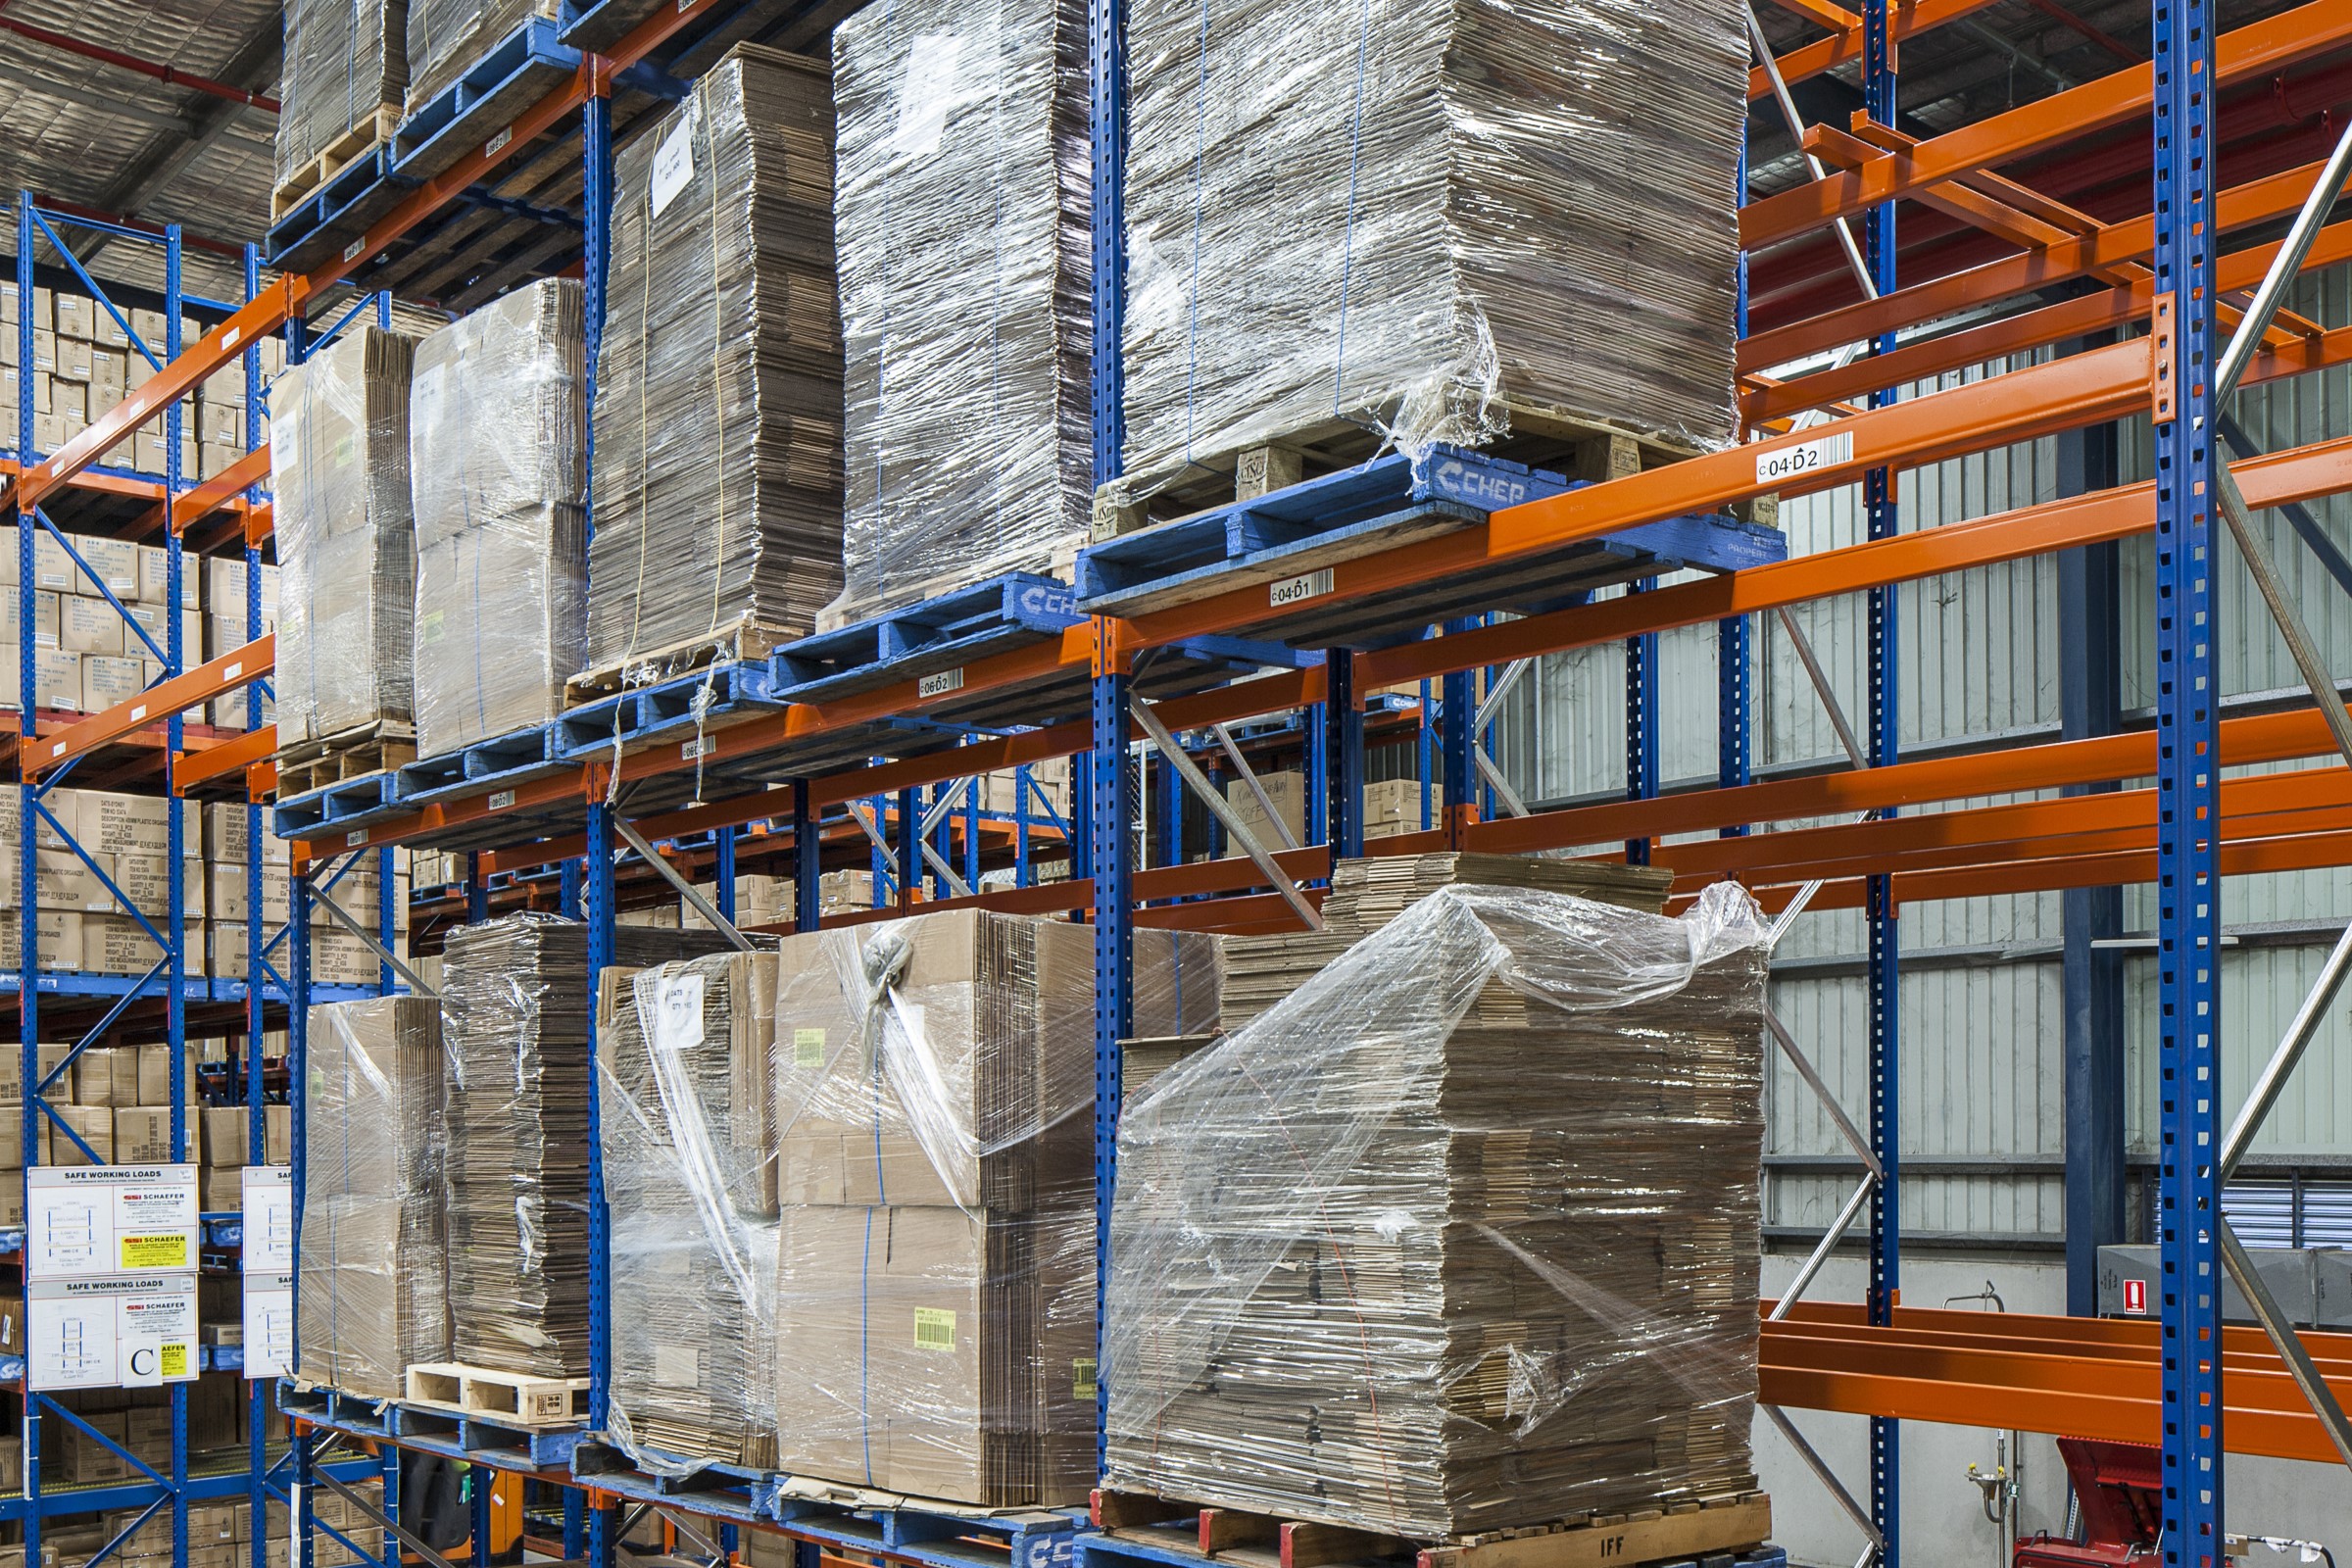 How to determine the load capacity of a pallet rack